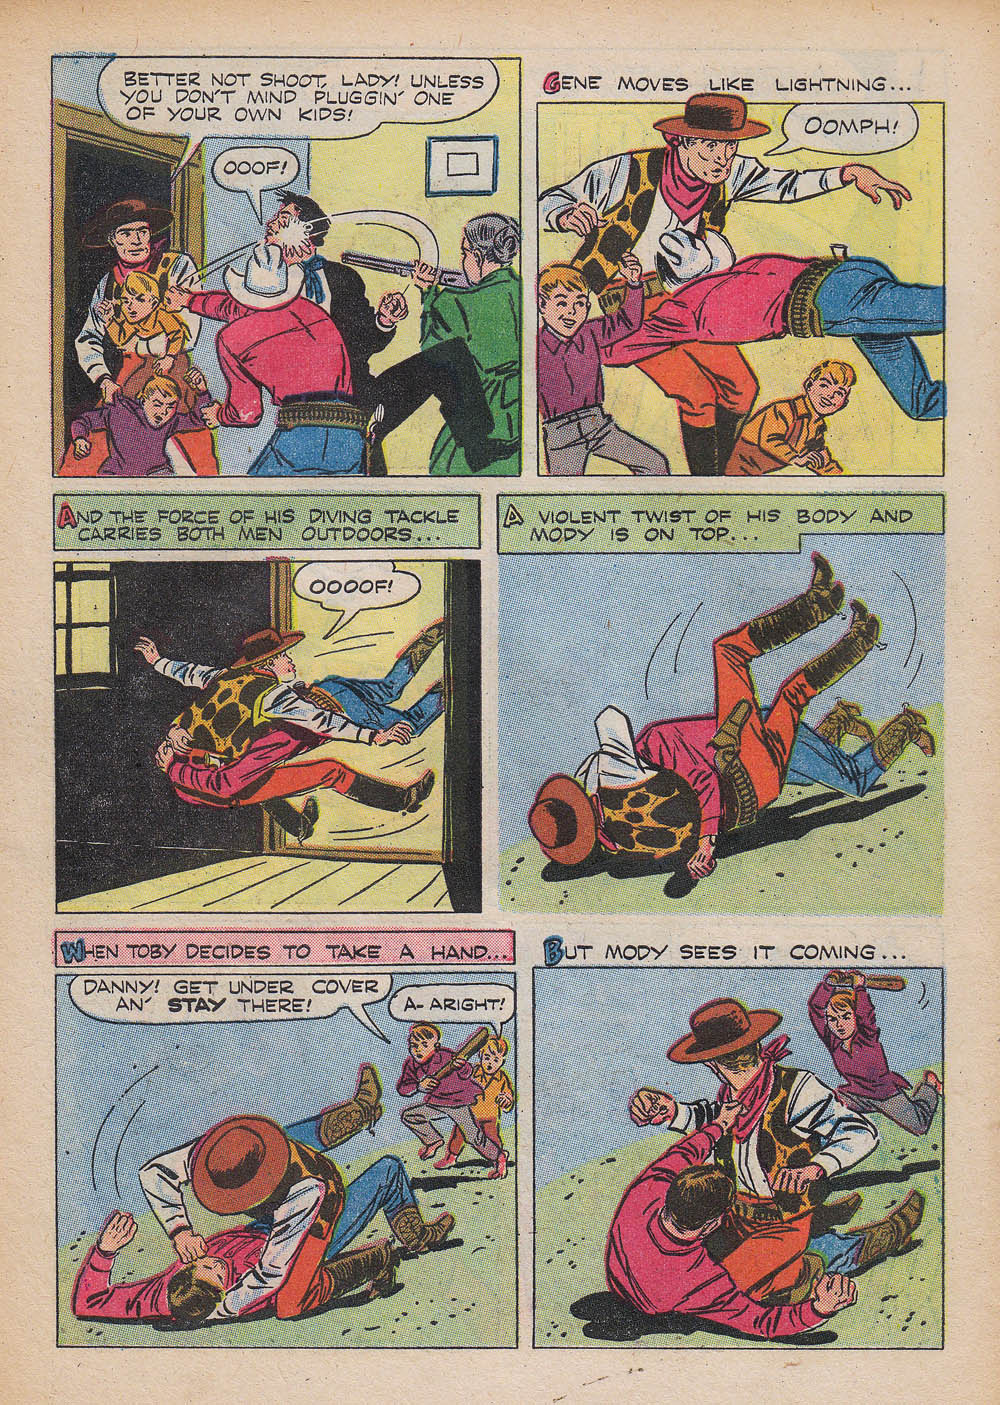 Gene Autry Comics (1946) issue 81 - Page 14